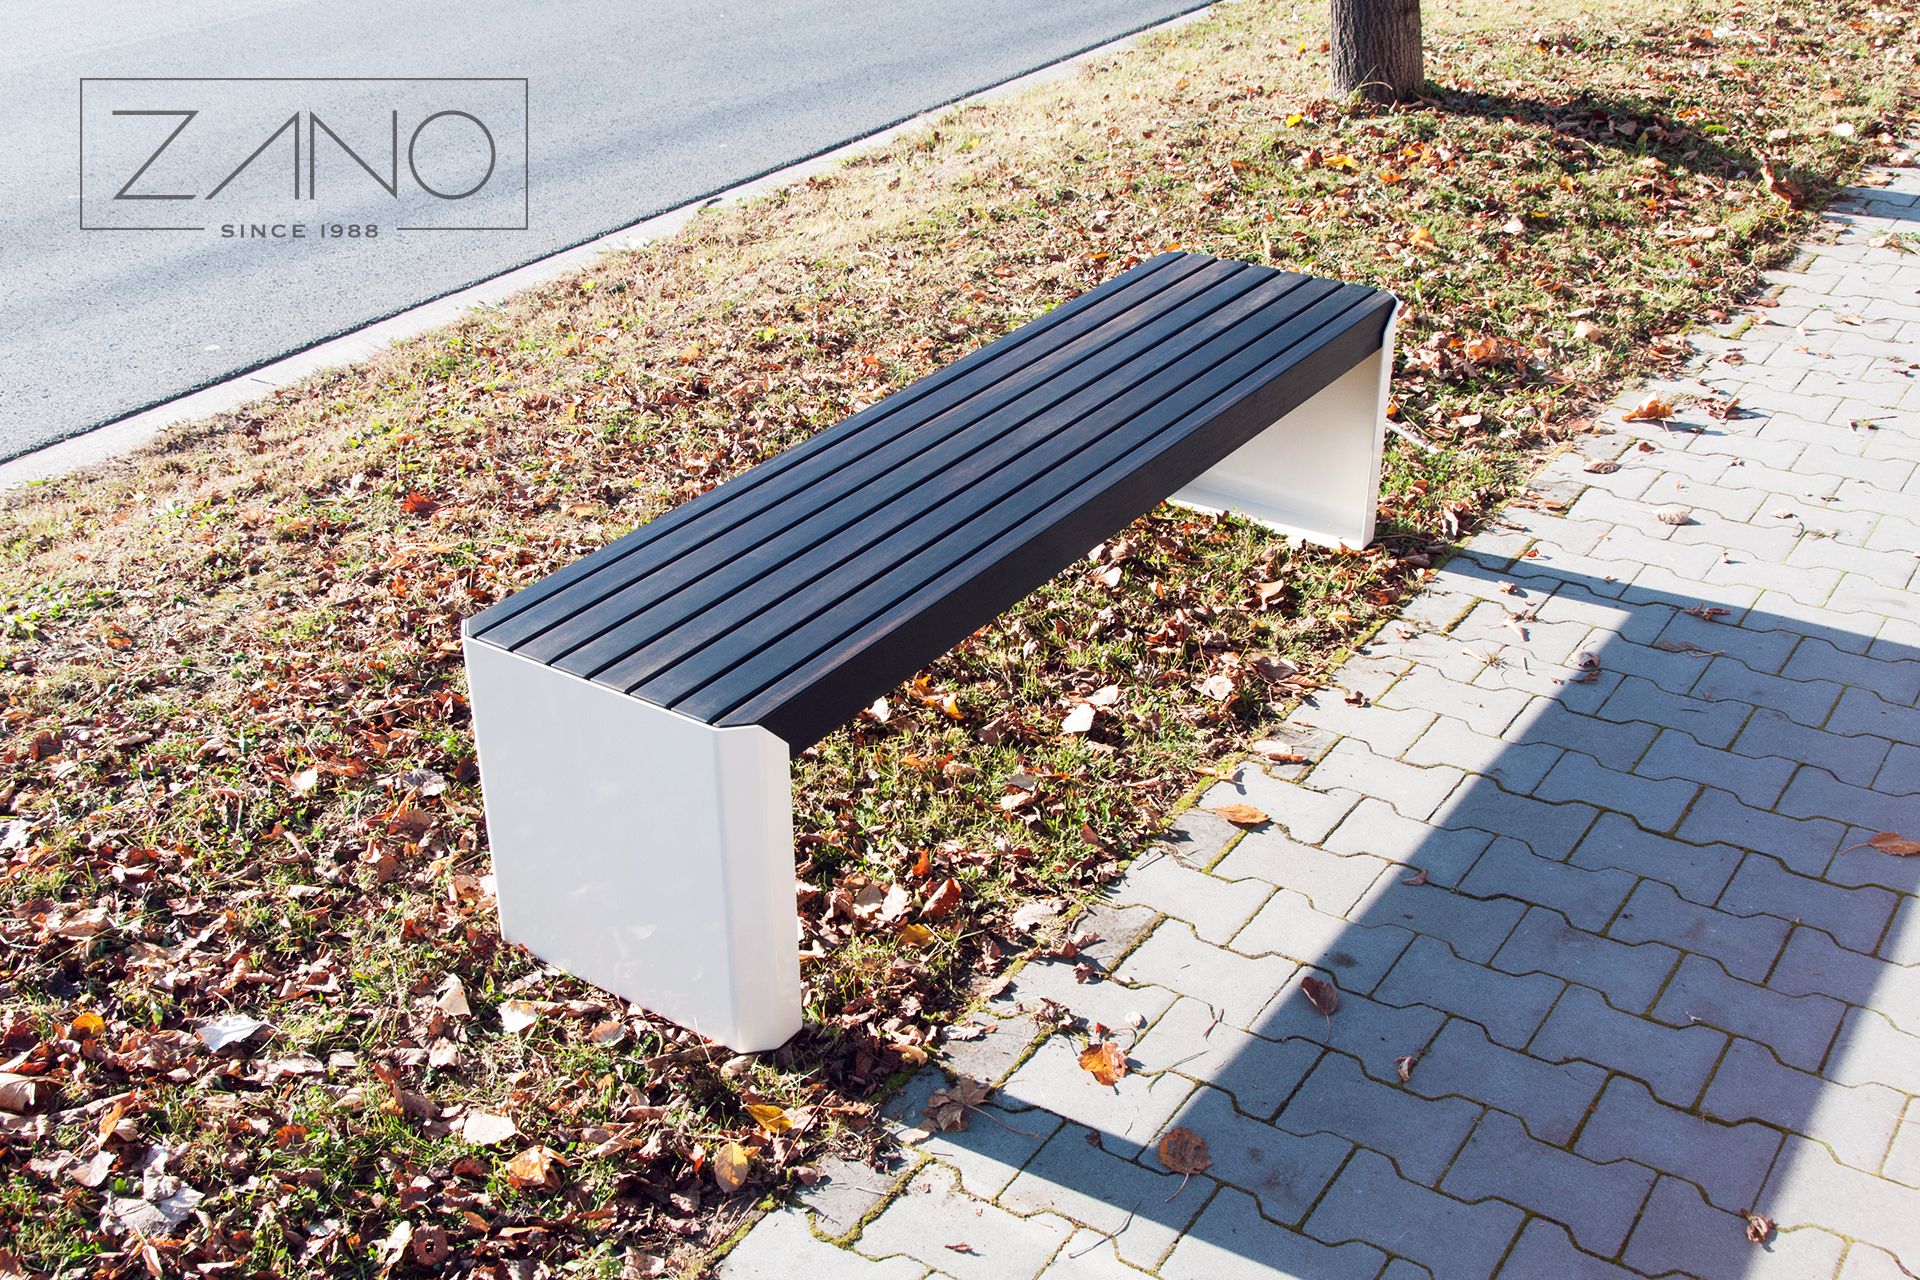 Stilo 02.448 steel bench 9010 RAL and MOSO® Bamboo